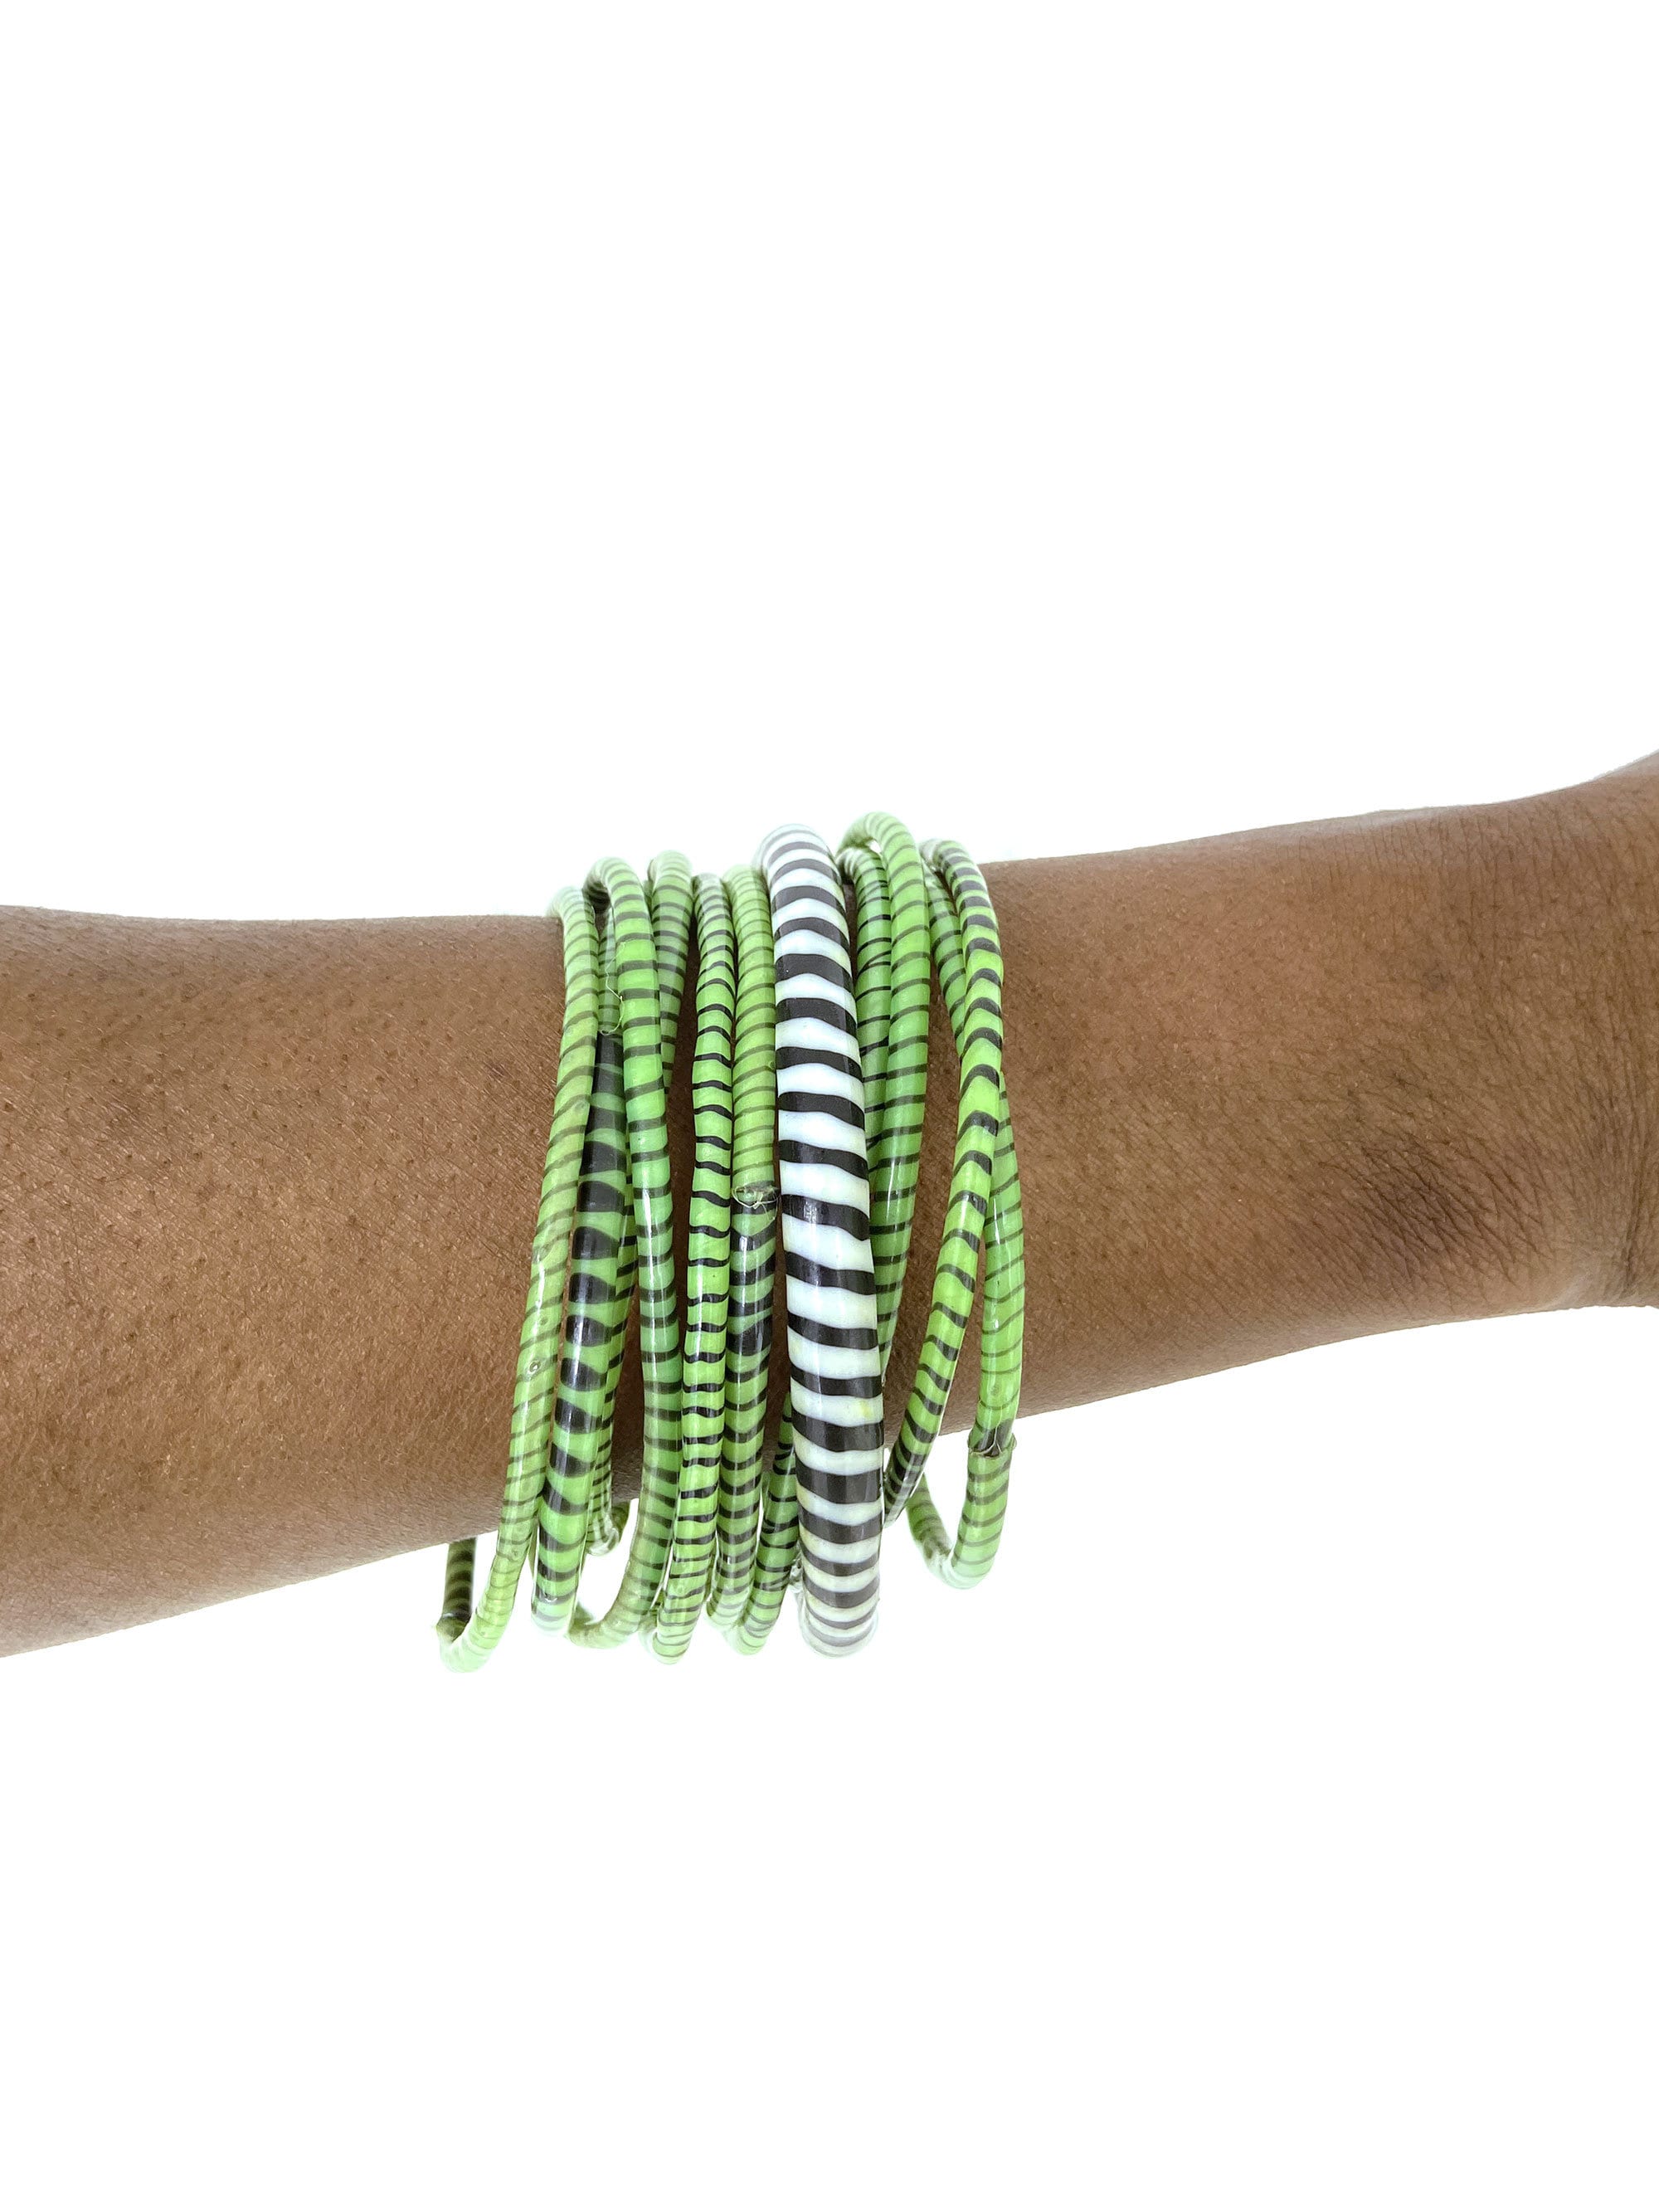 Wide Finest Design Recycled Plastic Bracelet - Green & Yellow